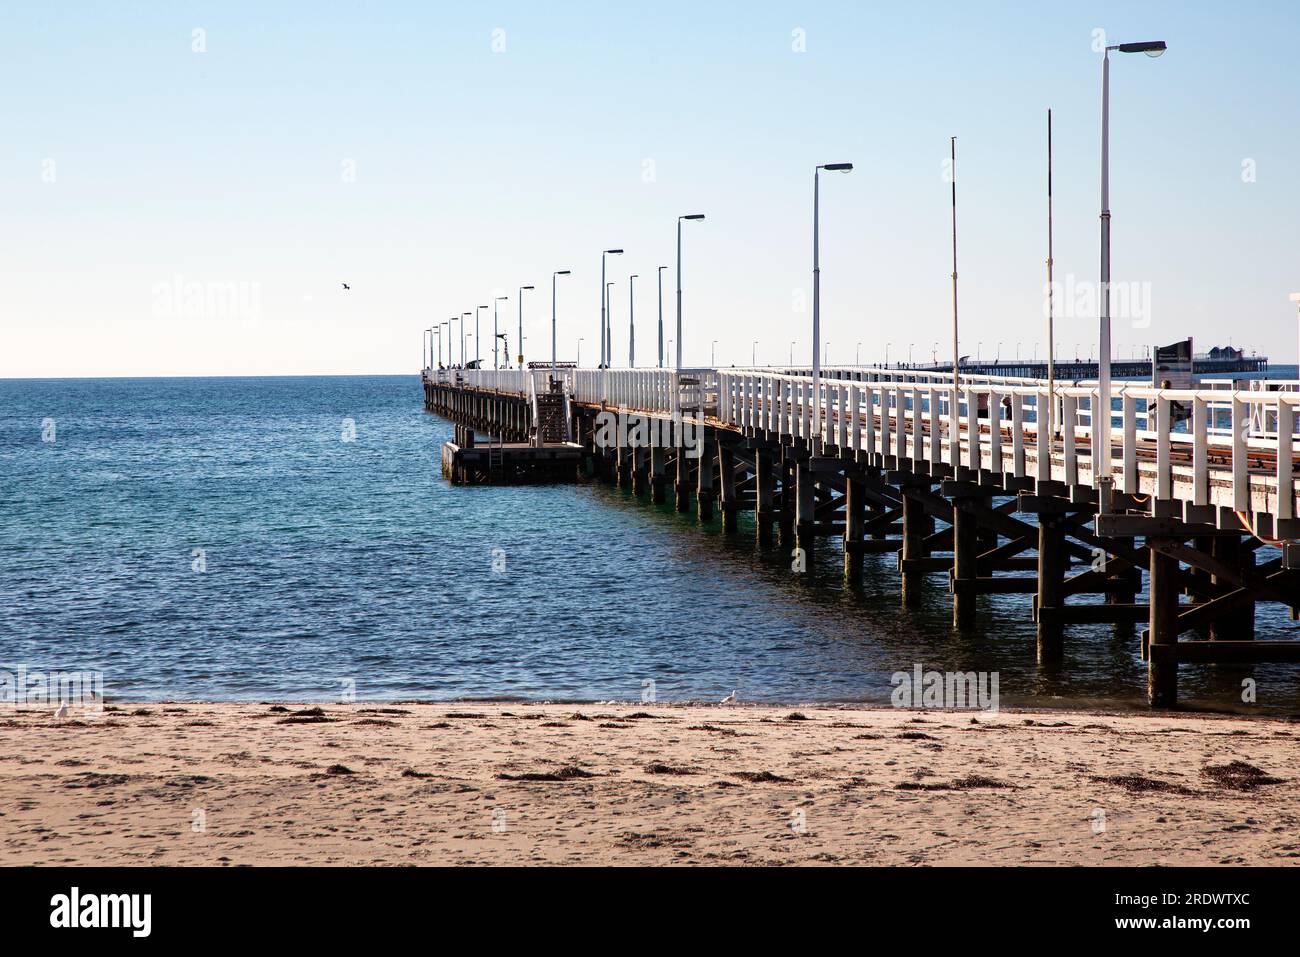 Historic Busselton Jetty extends over protected waters of Geographe Bay of the Indian Ocean in Busselton, Western Australian Stock Photo